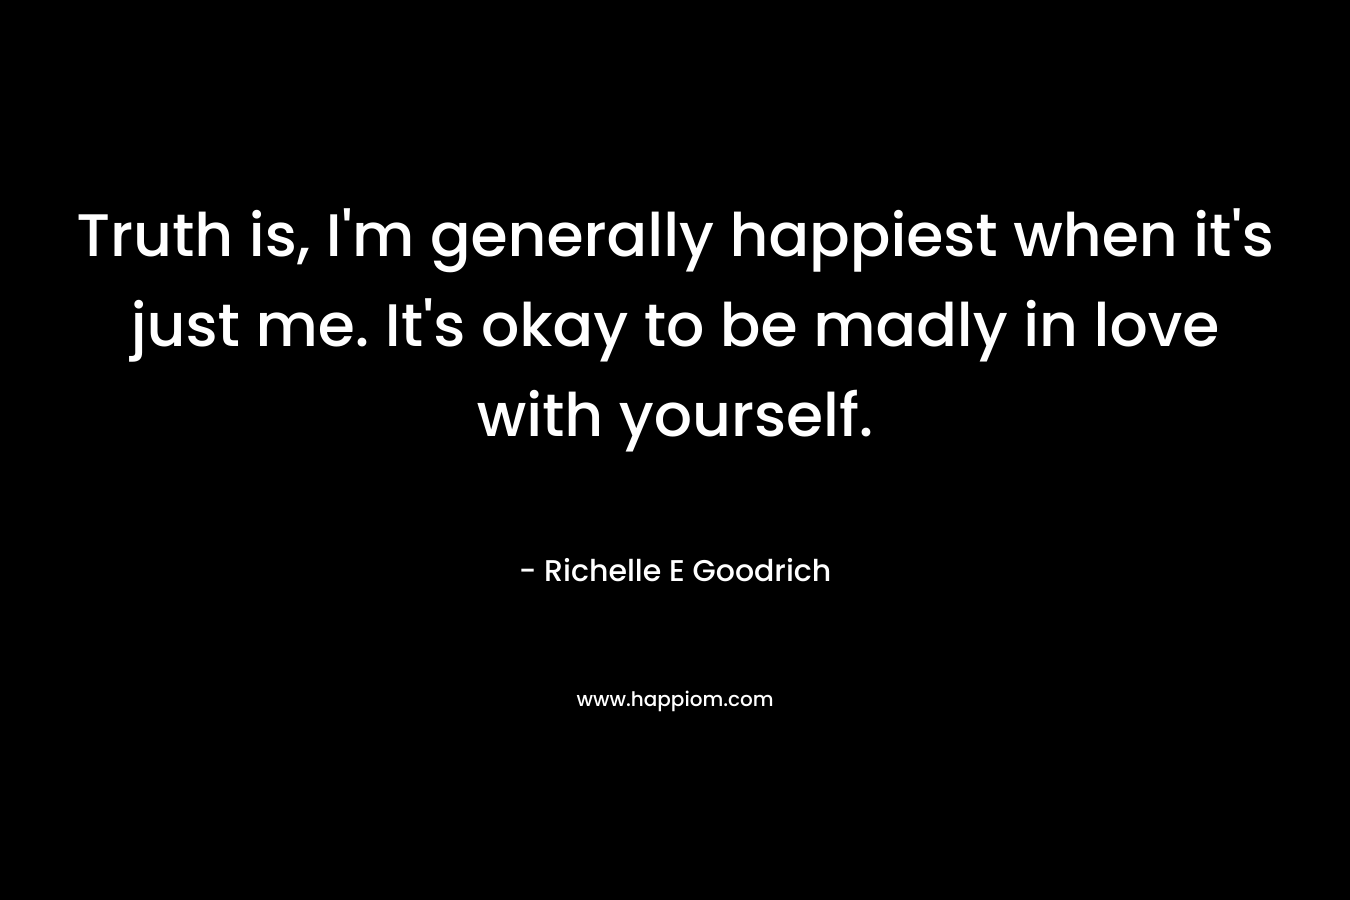 Truth is, I'm generally happiest when it's just me. It's okay to be madly in love with yourself.